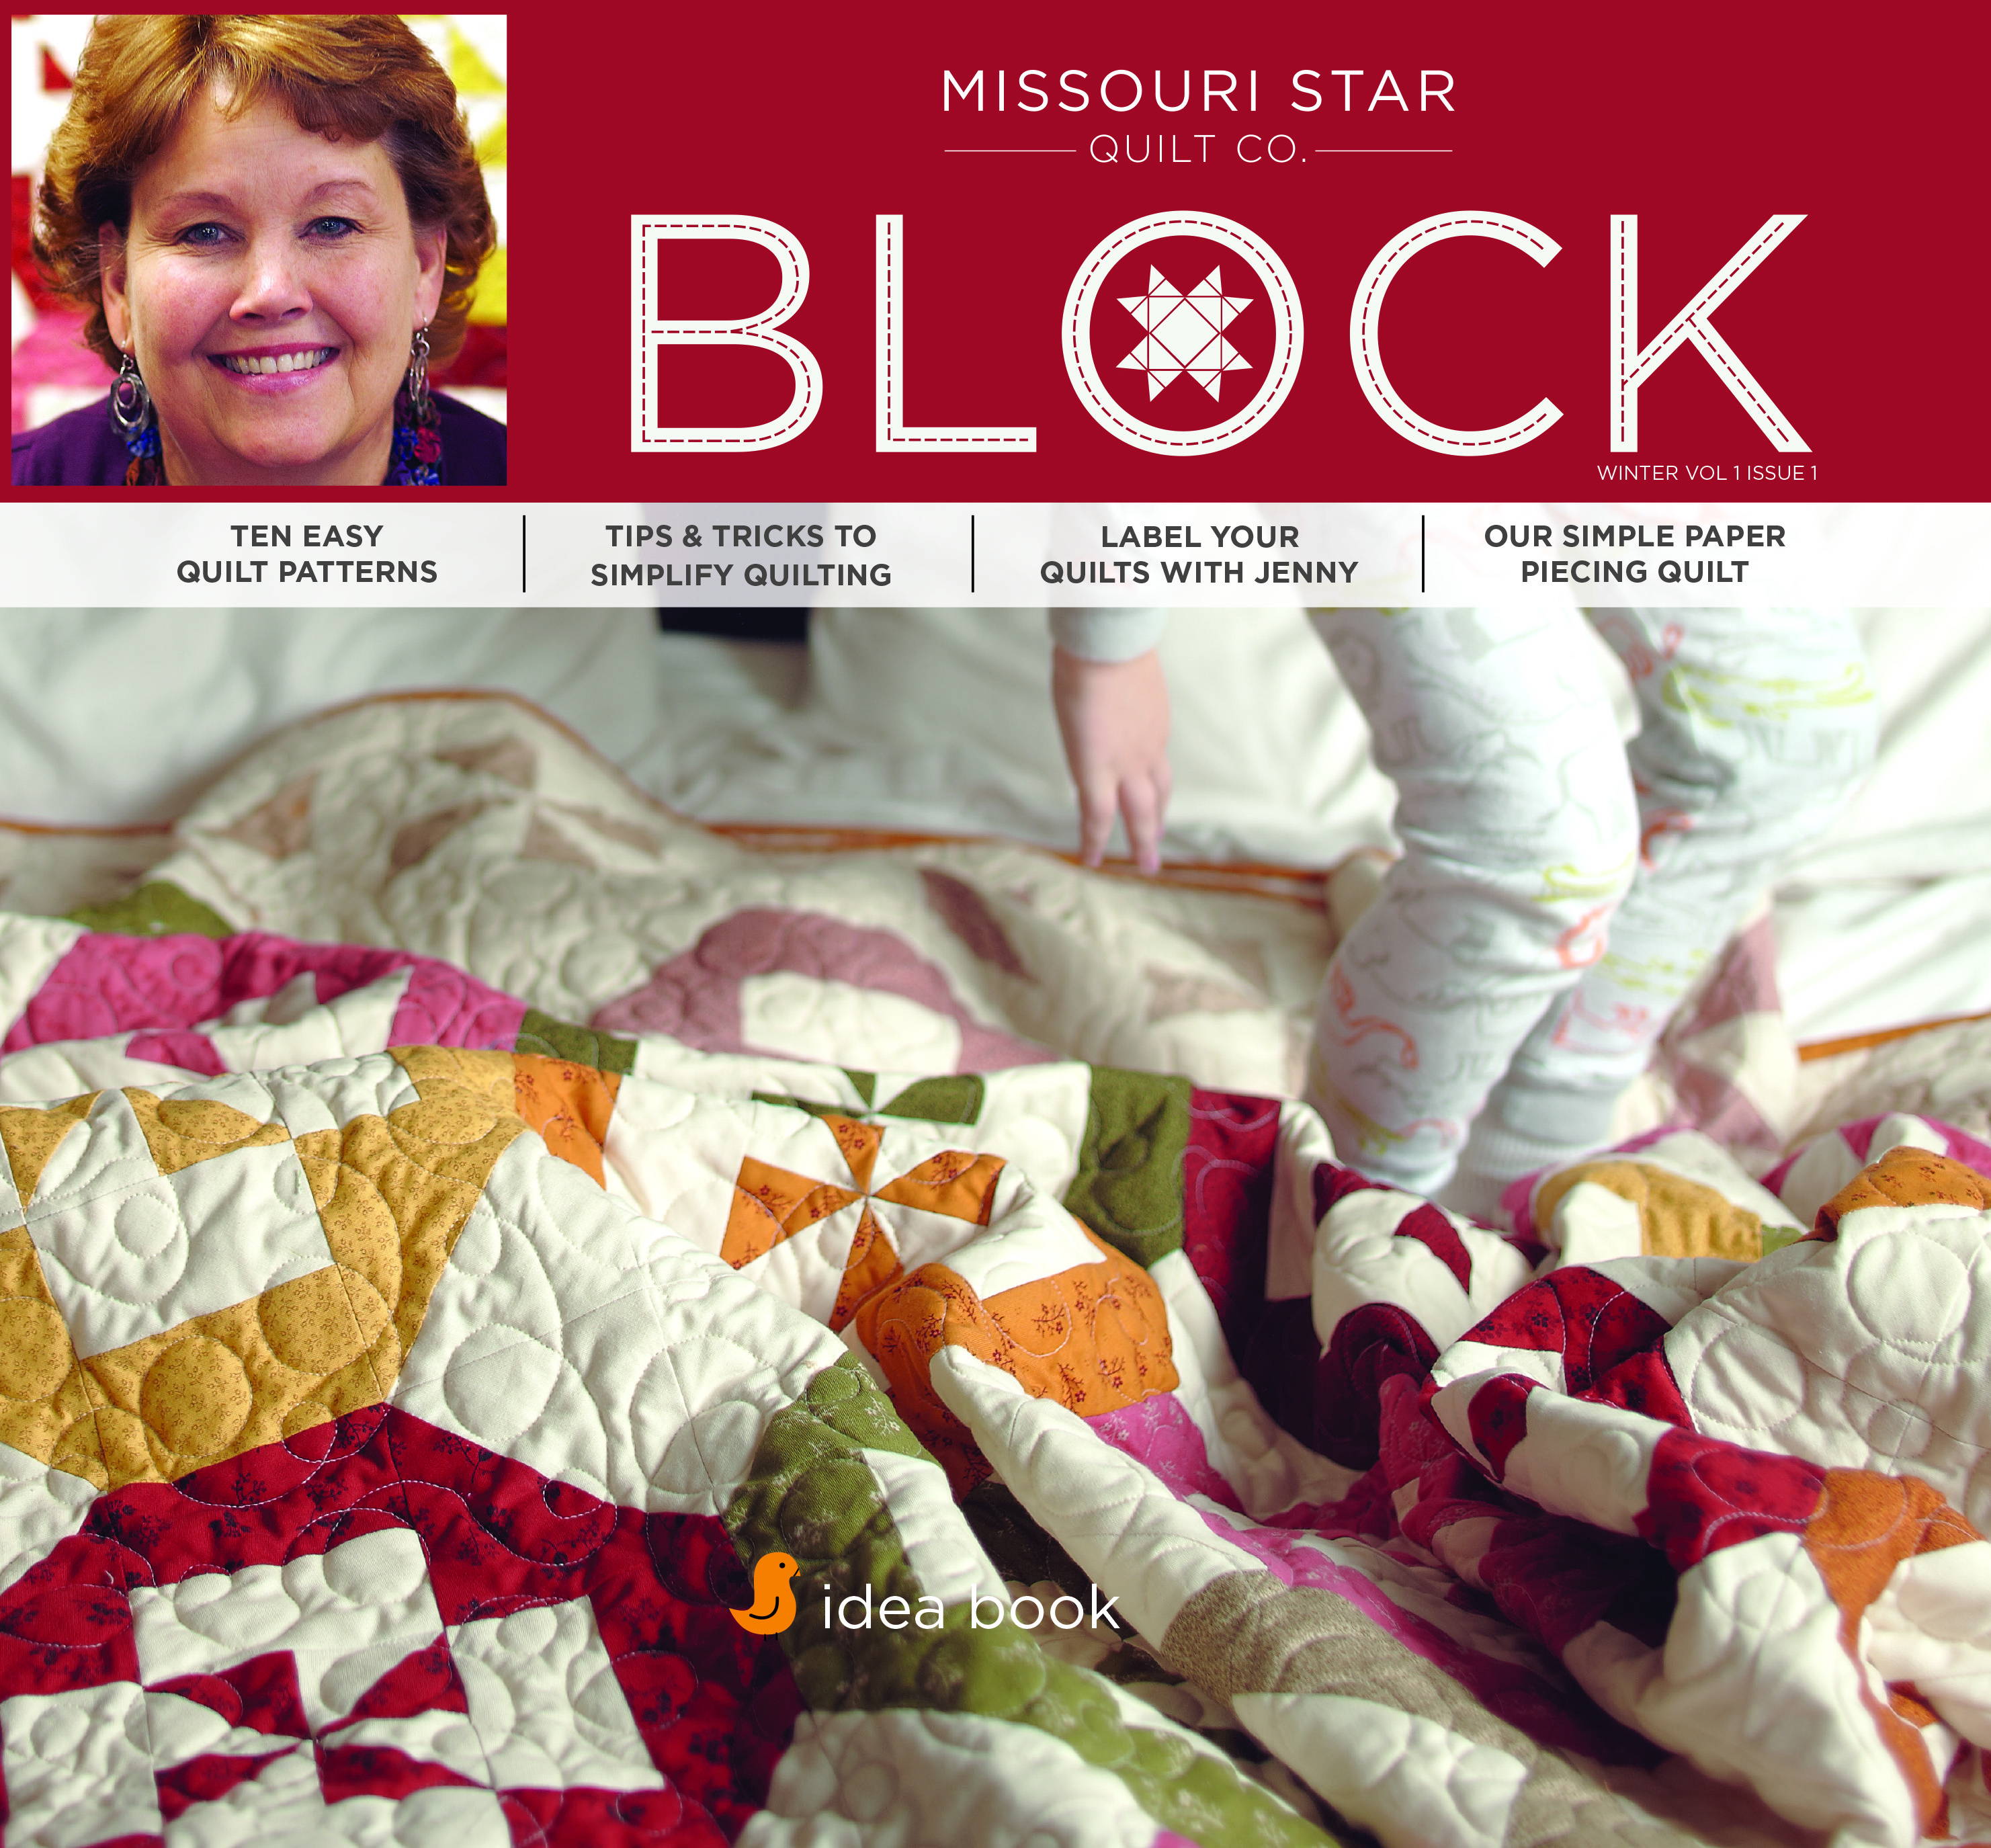 BLOCK is our very own quilting magazine, full of quilt patterns and inspiration!